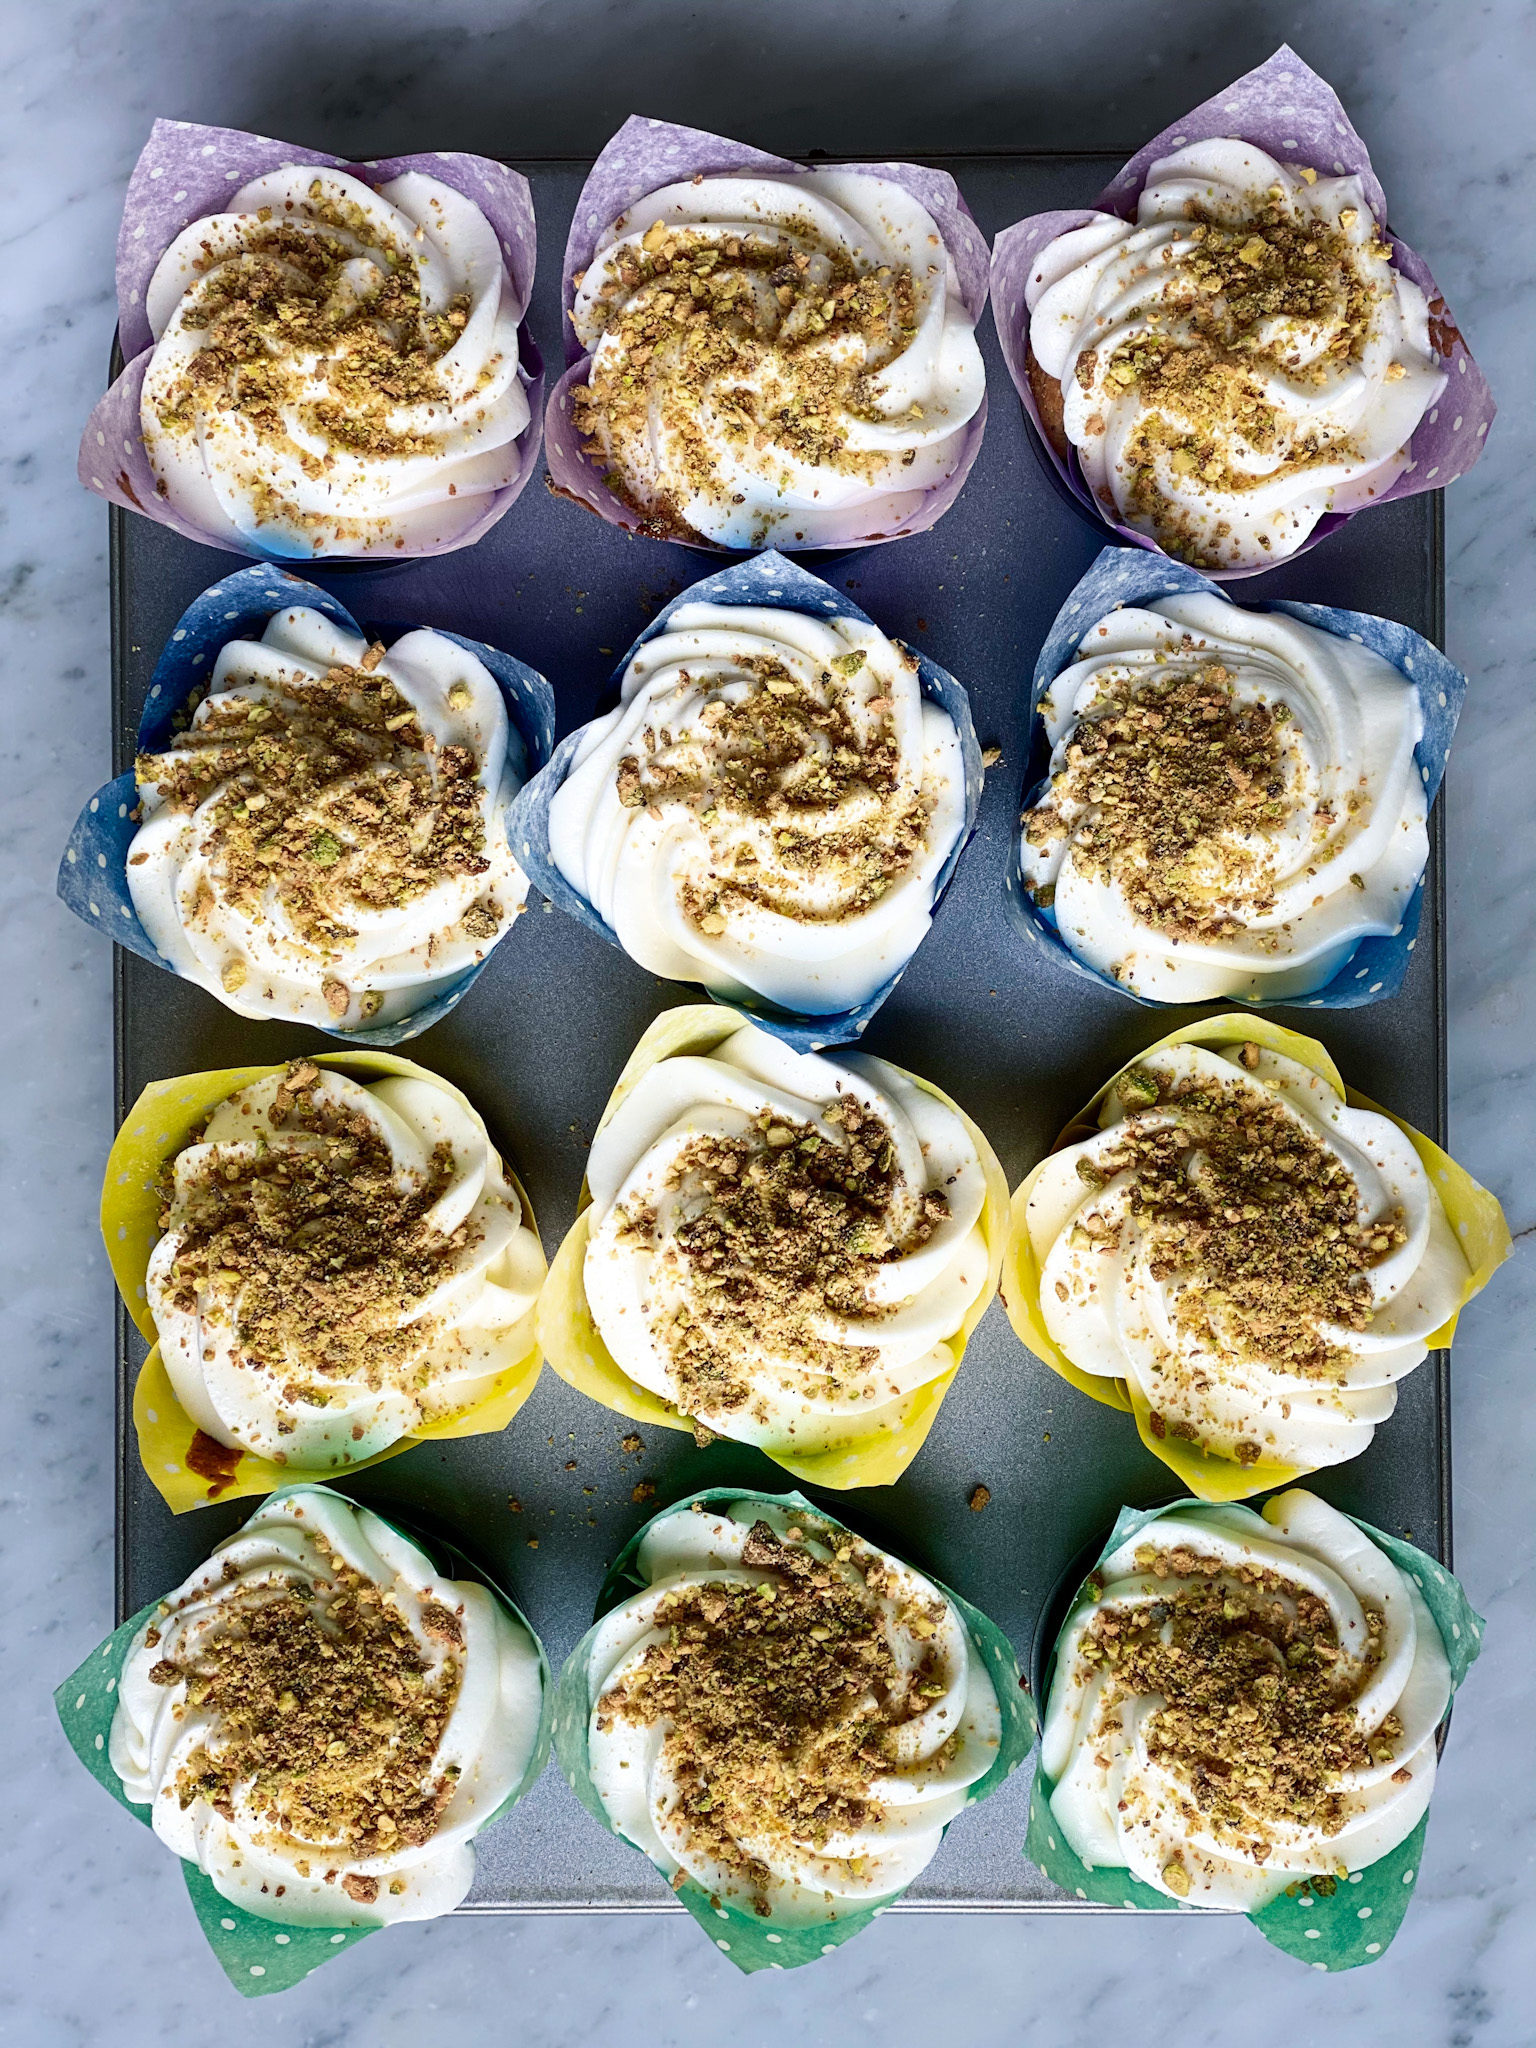 1 dozen pistachio cupcakes with cream cheese frosting and pistachios on top